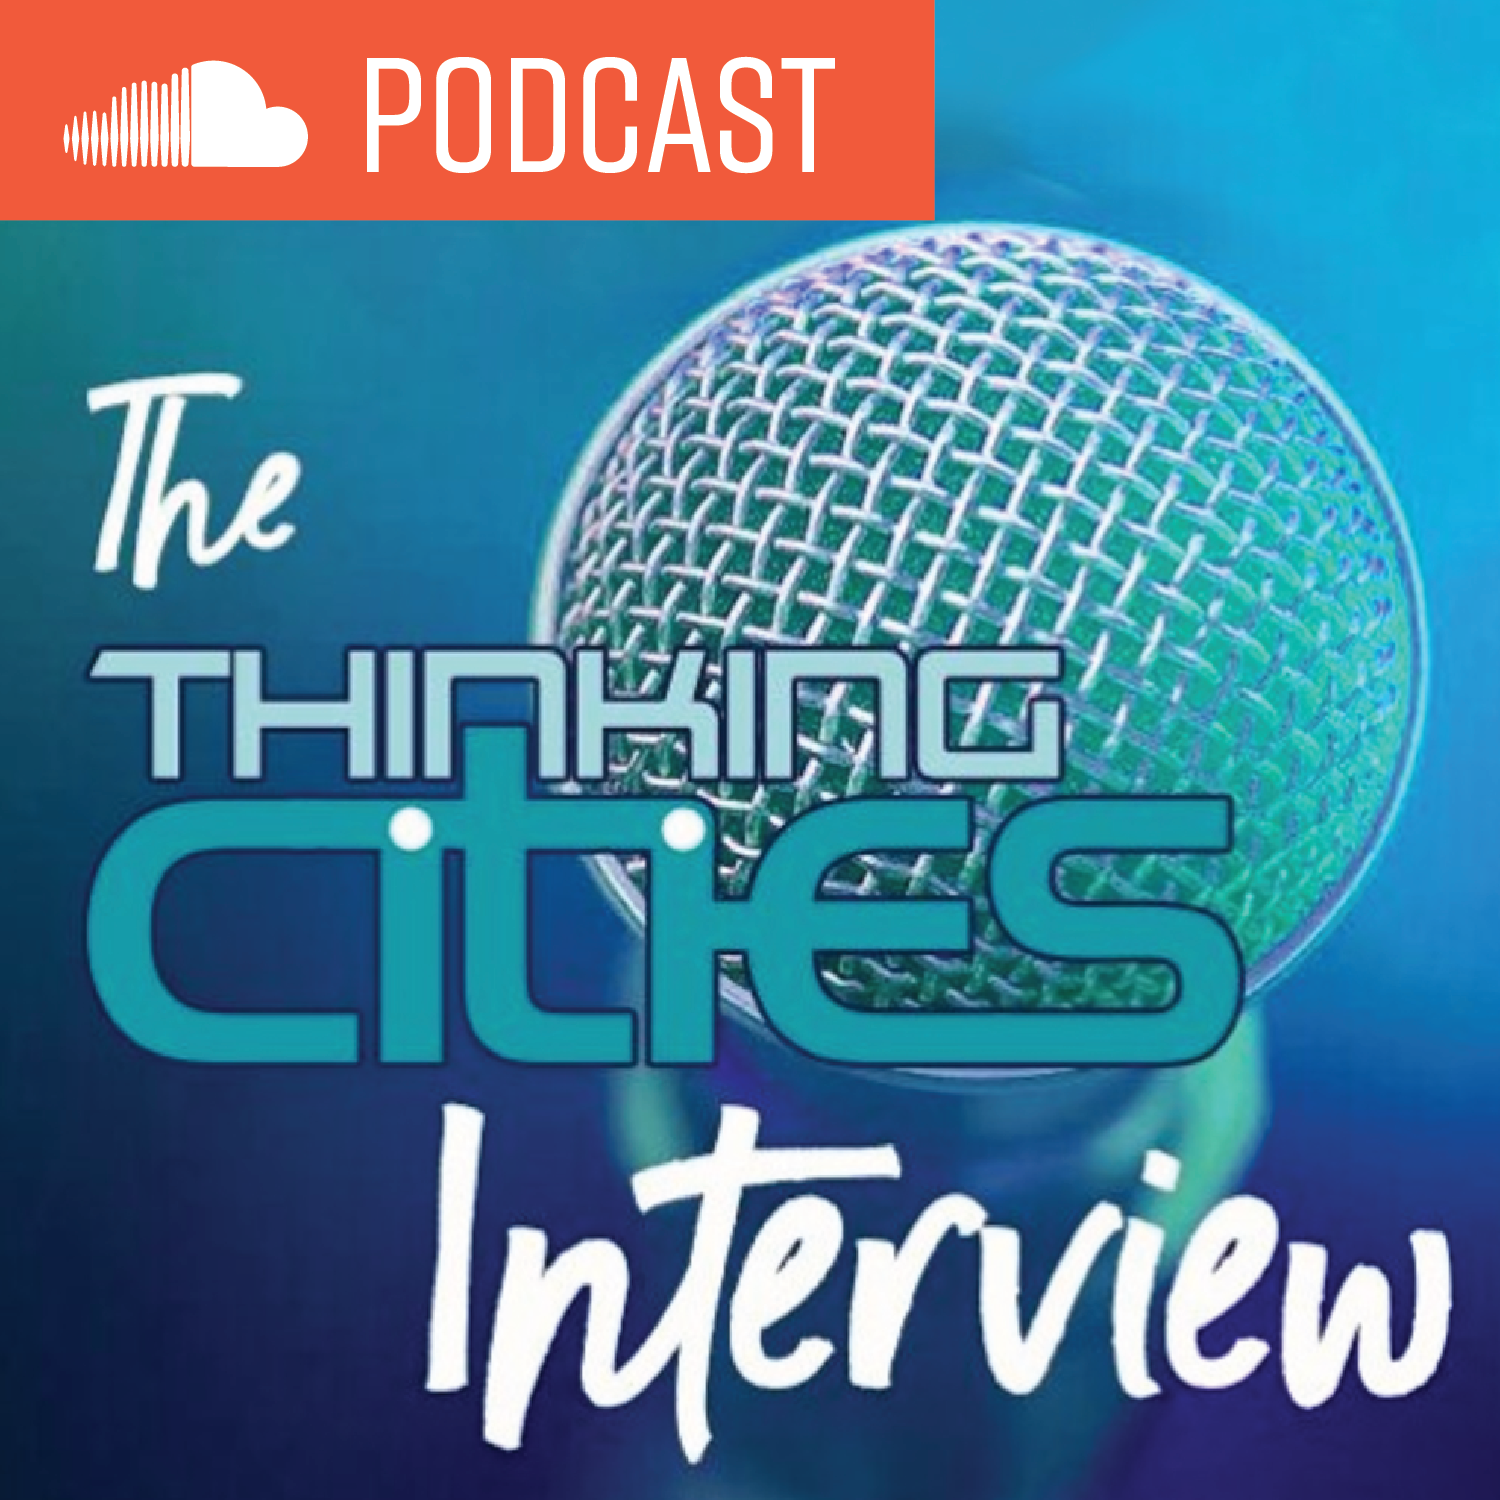 Podcast Thinking Cities